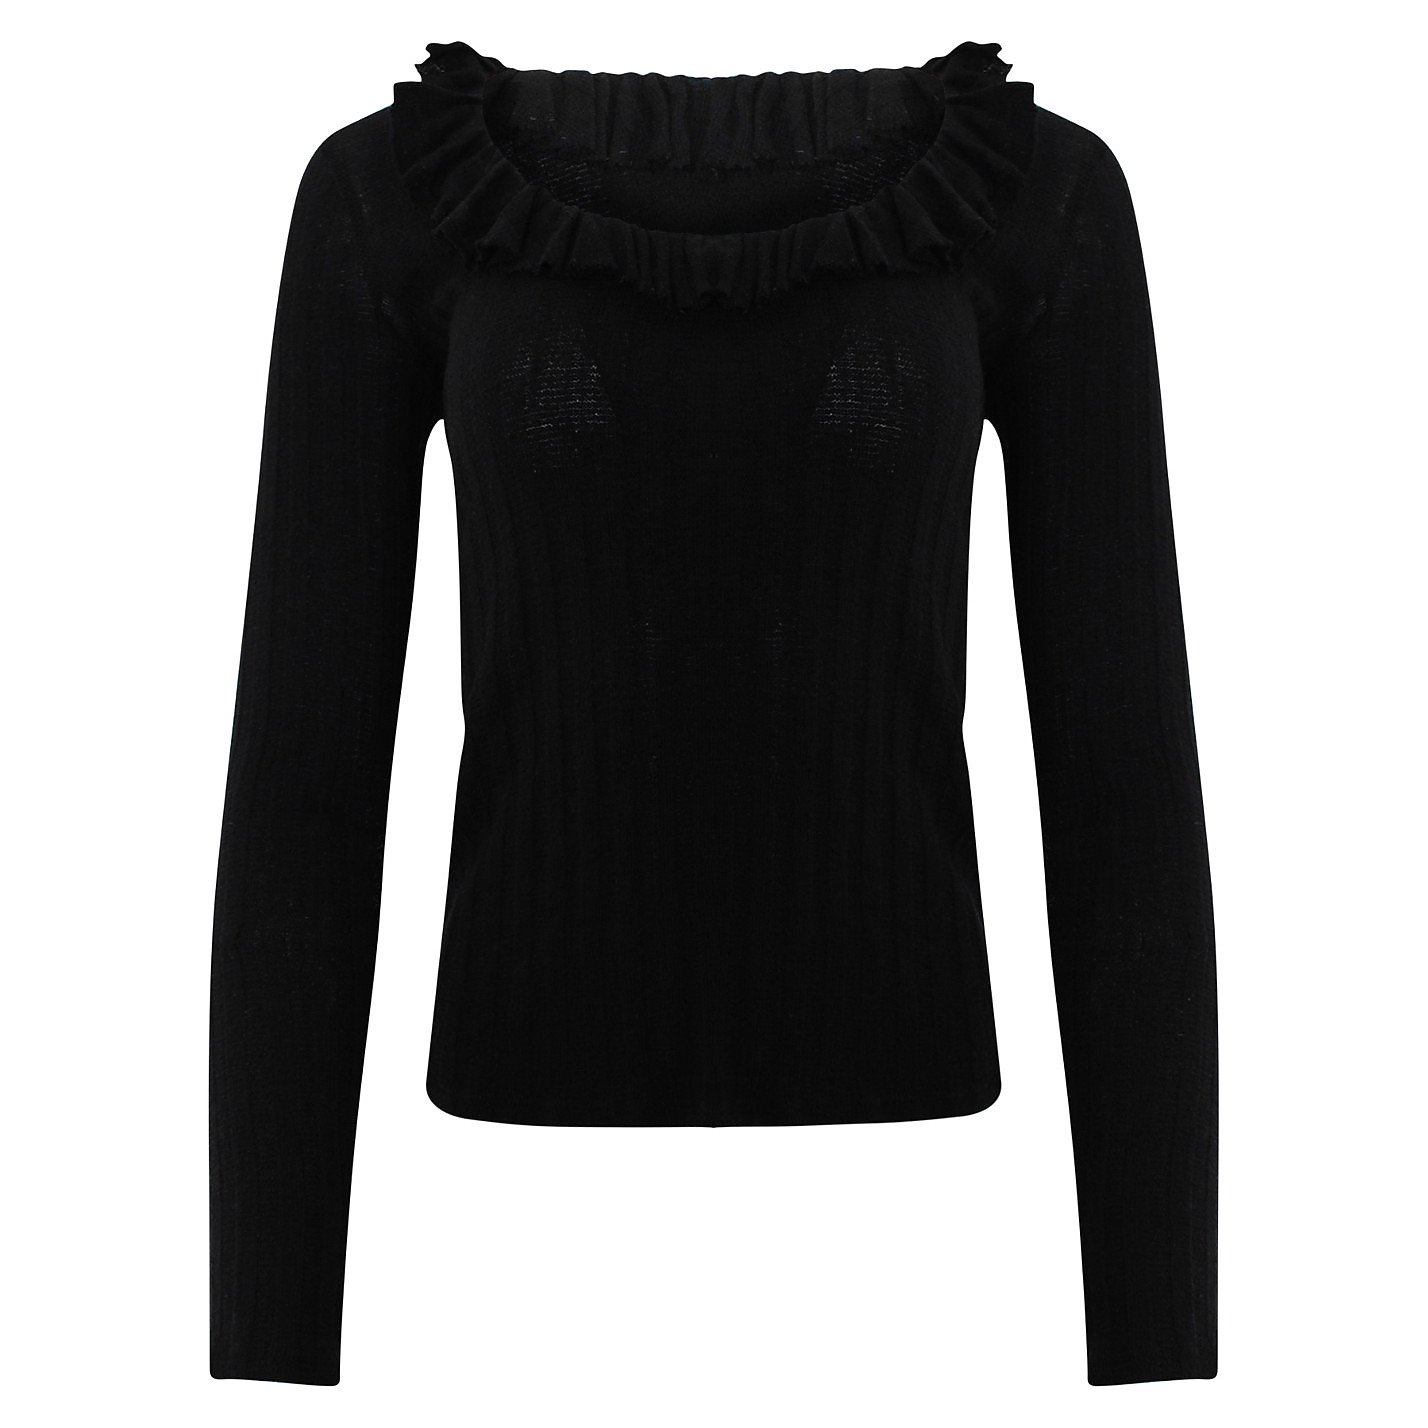 Reformation Ribbed Knit Long Sleeve Top